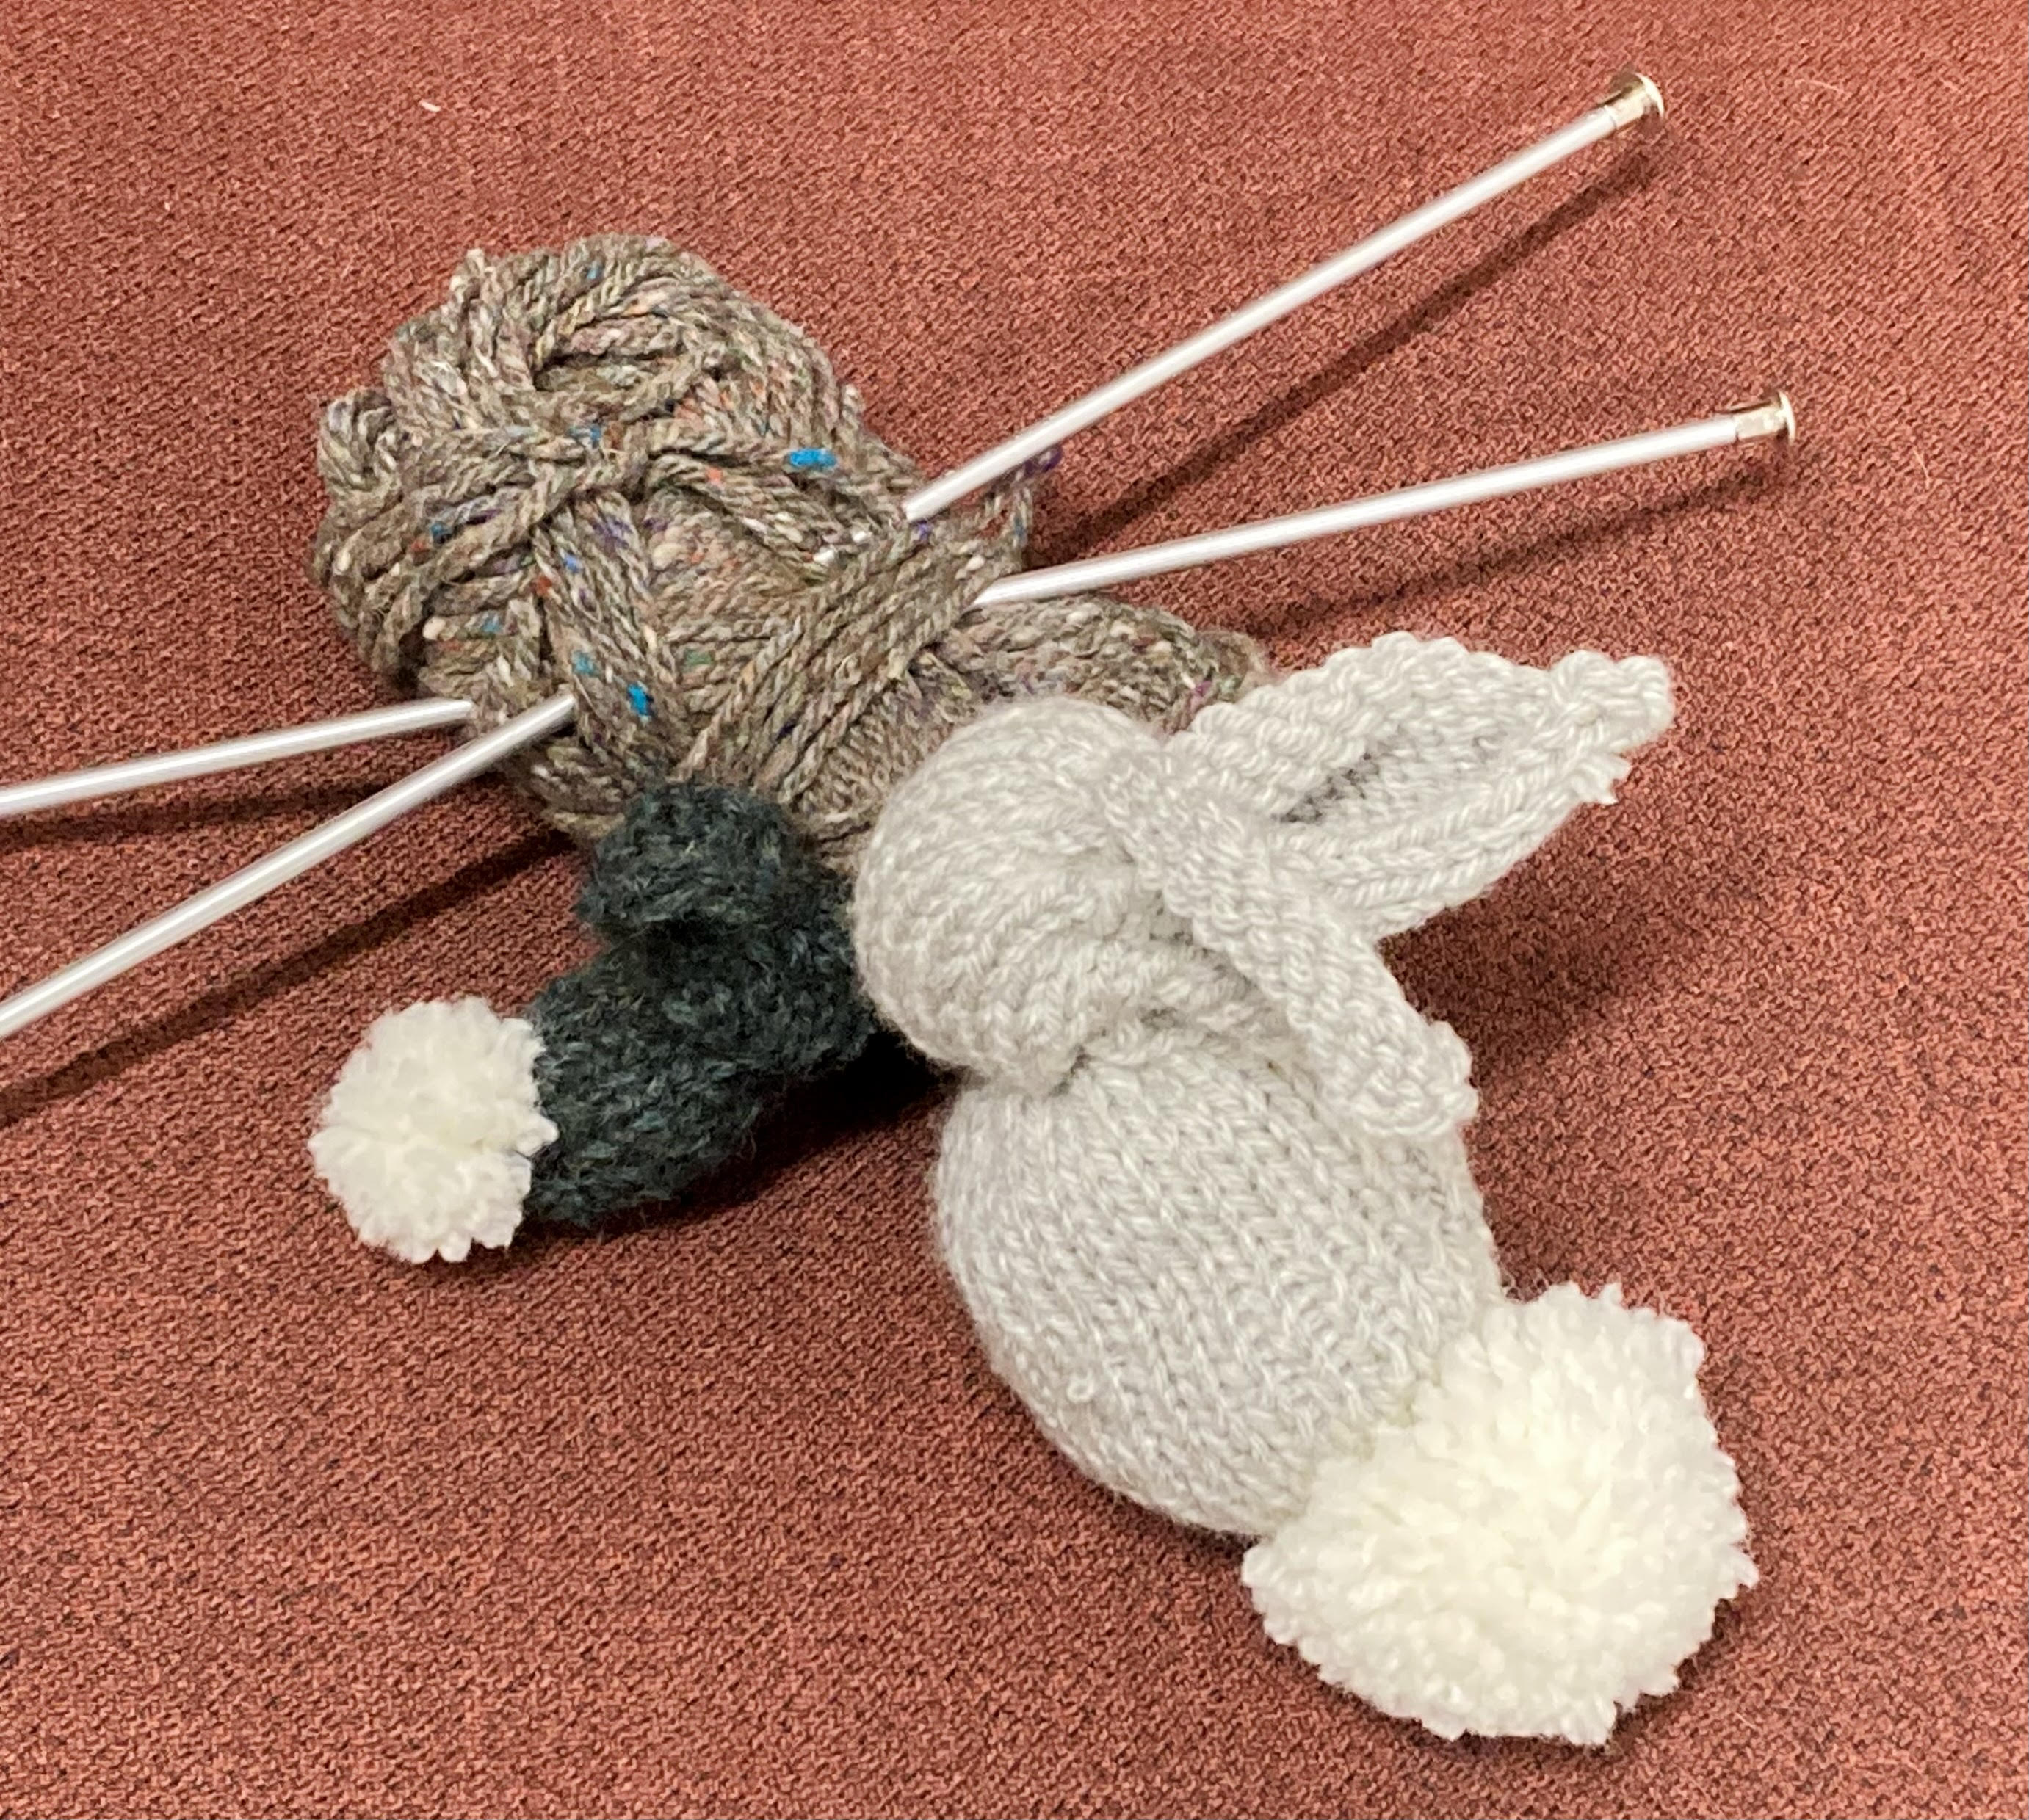 Two knit bunnies of differing sizes sit next to a ball of yarn with knitting needles sticking out of it.